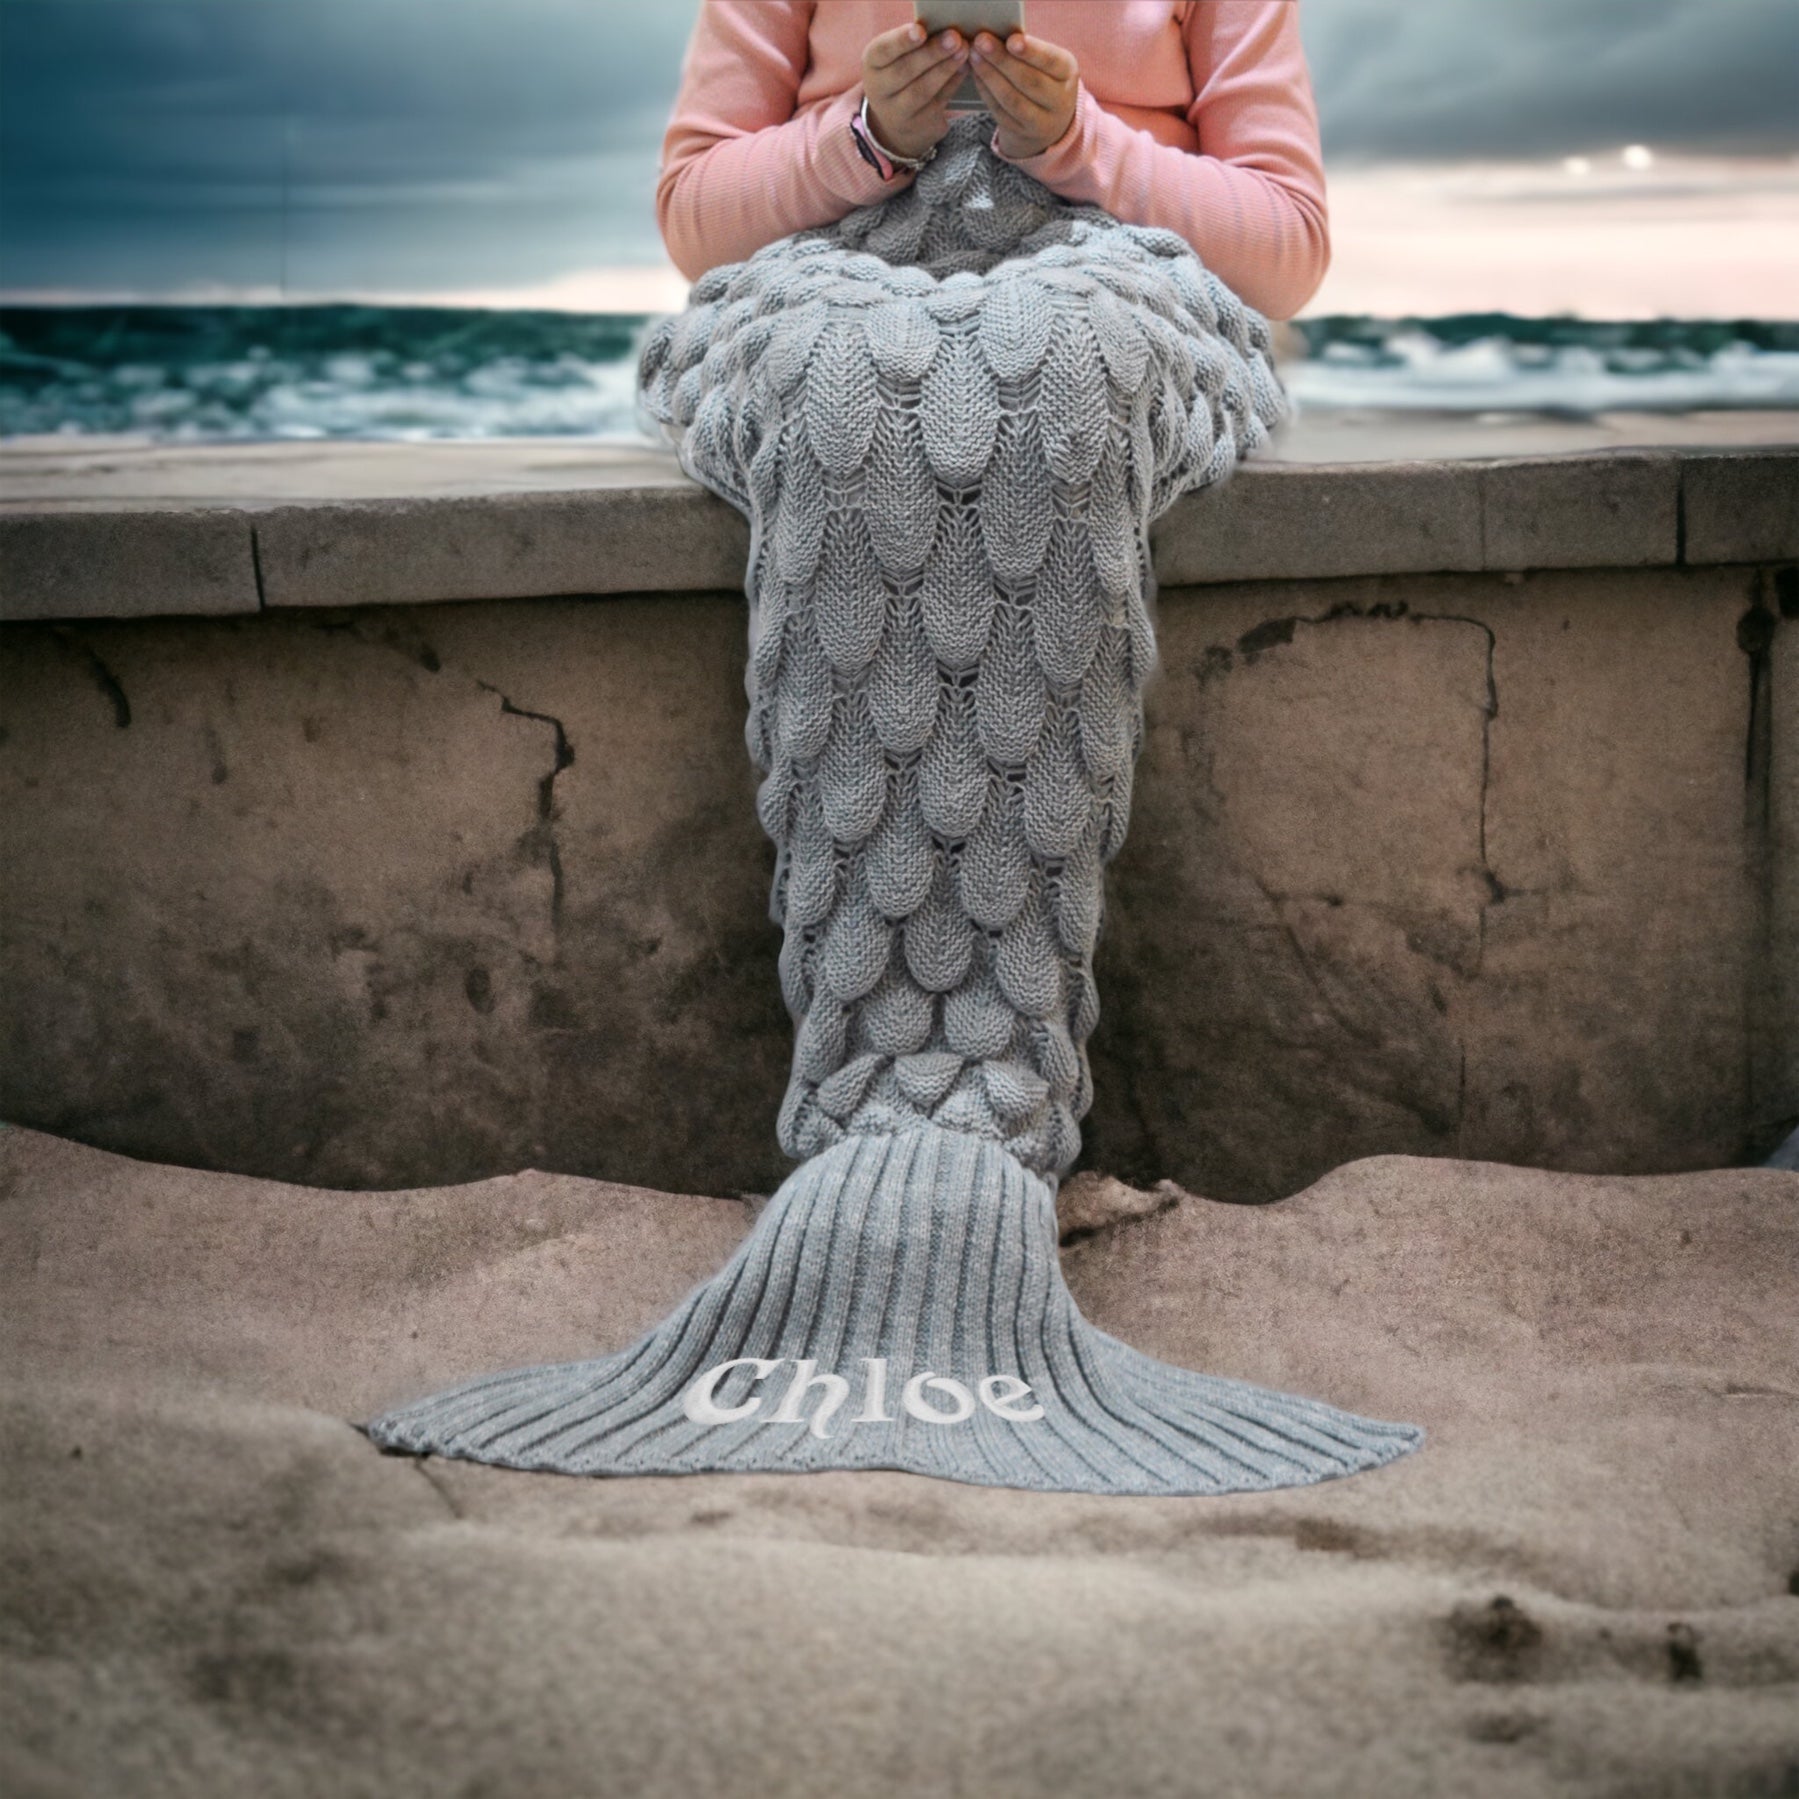 "Mermaid Tail Blanket - Magical Aqua" Description: "A magical aqua-colored mermaid tail blanket designed for ultimate comfort, with an option to personalize it with a name."